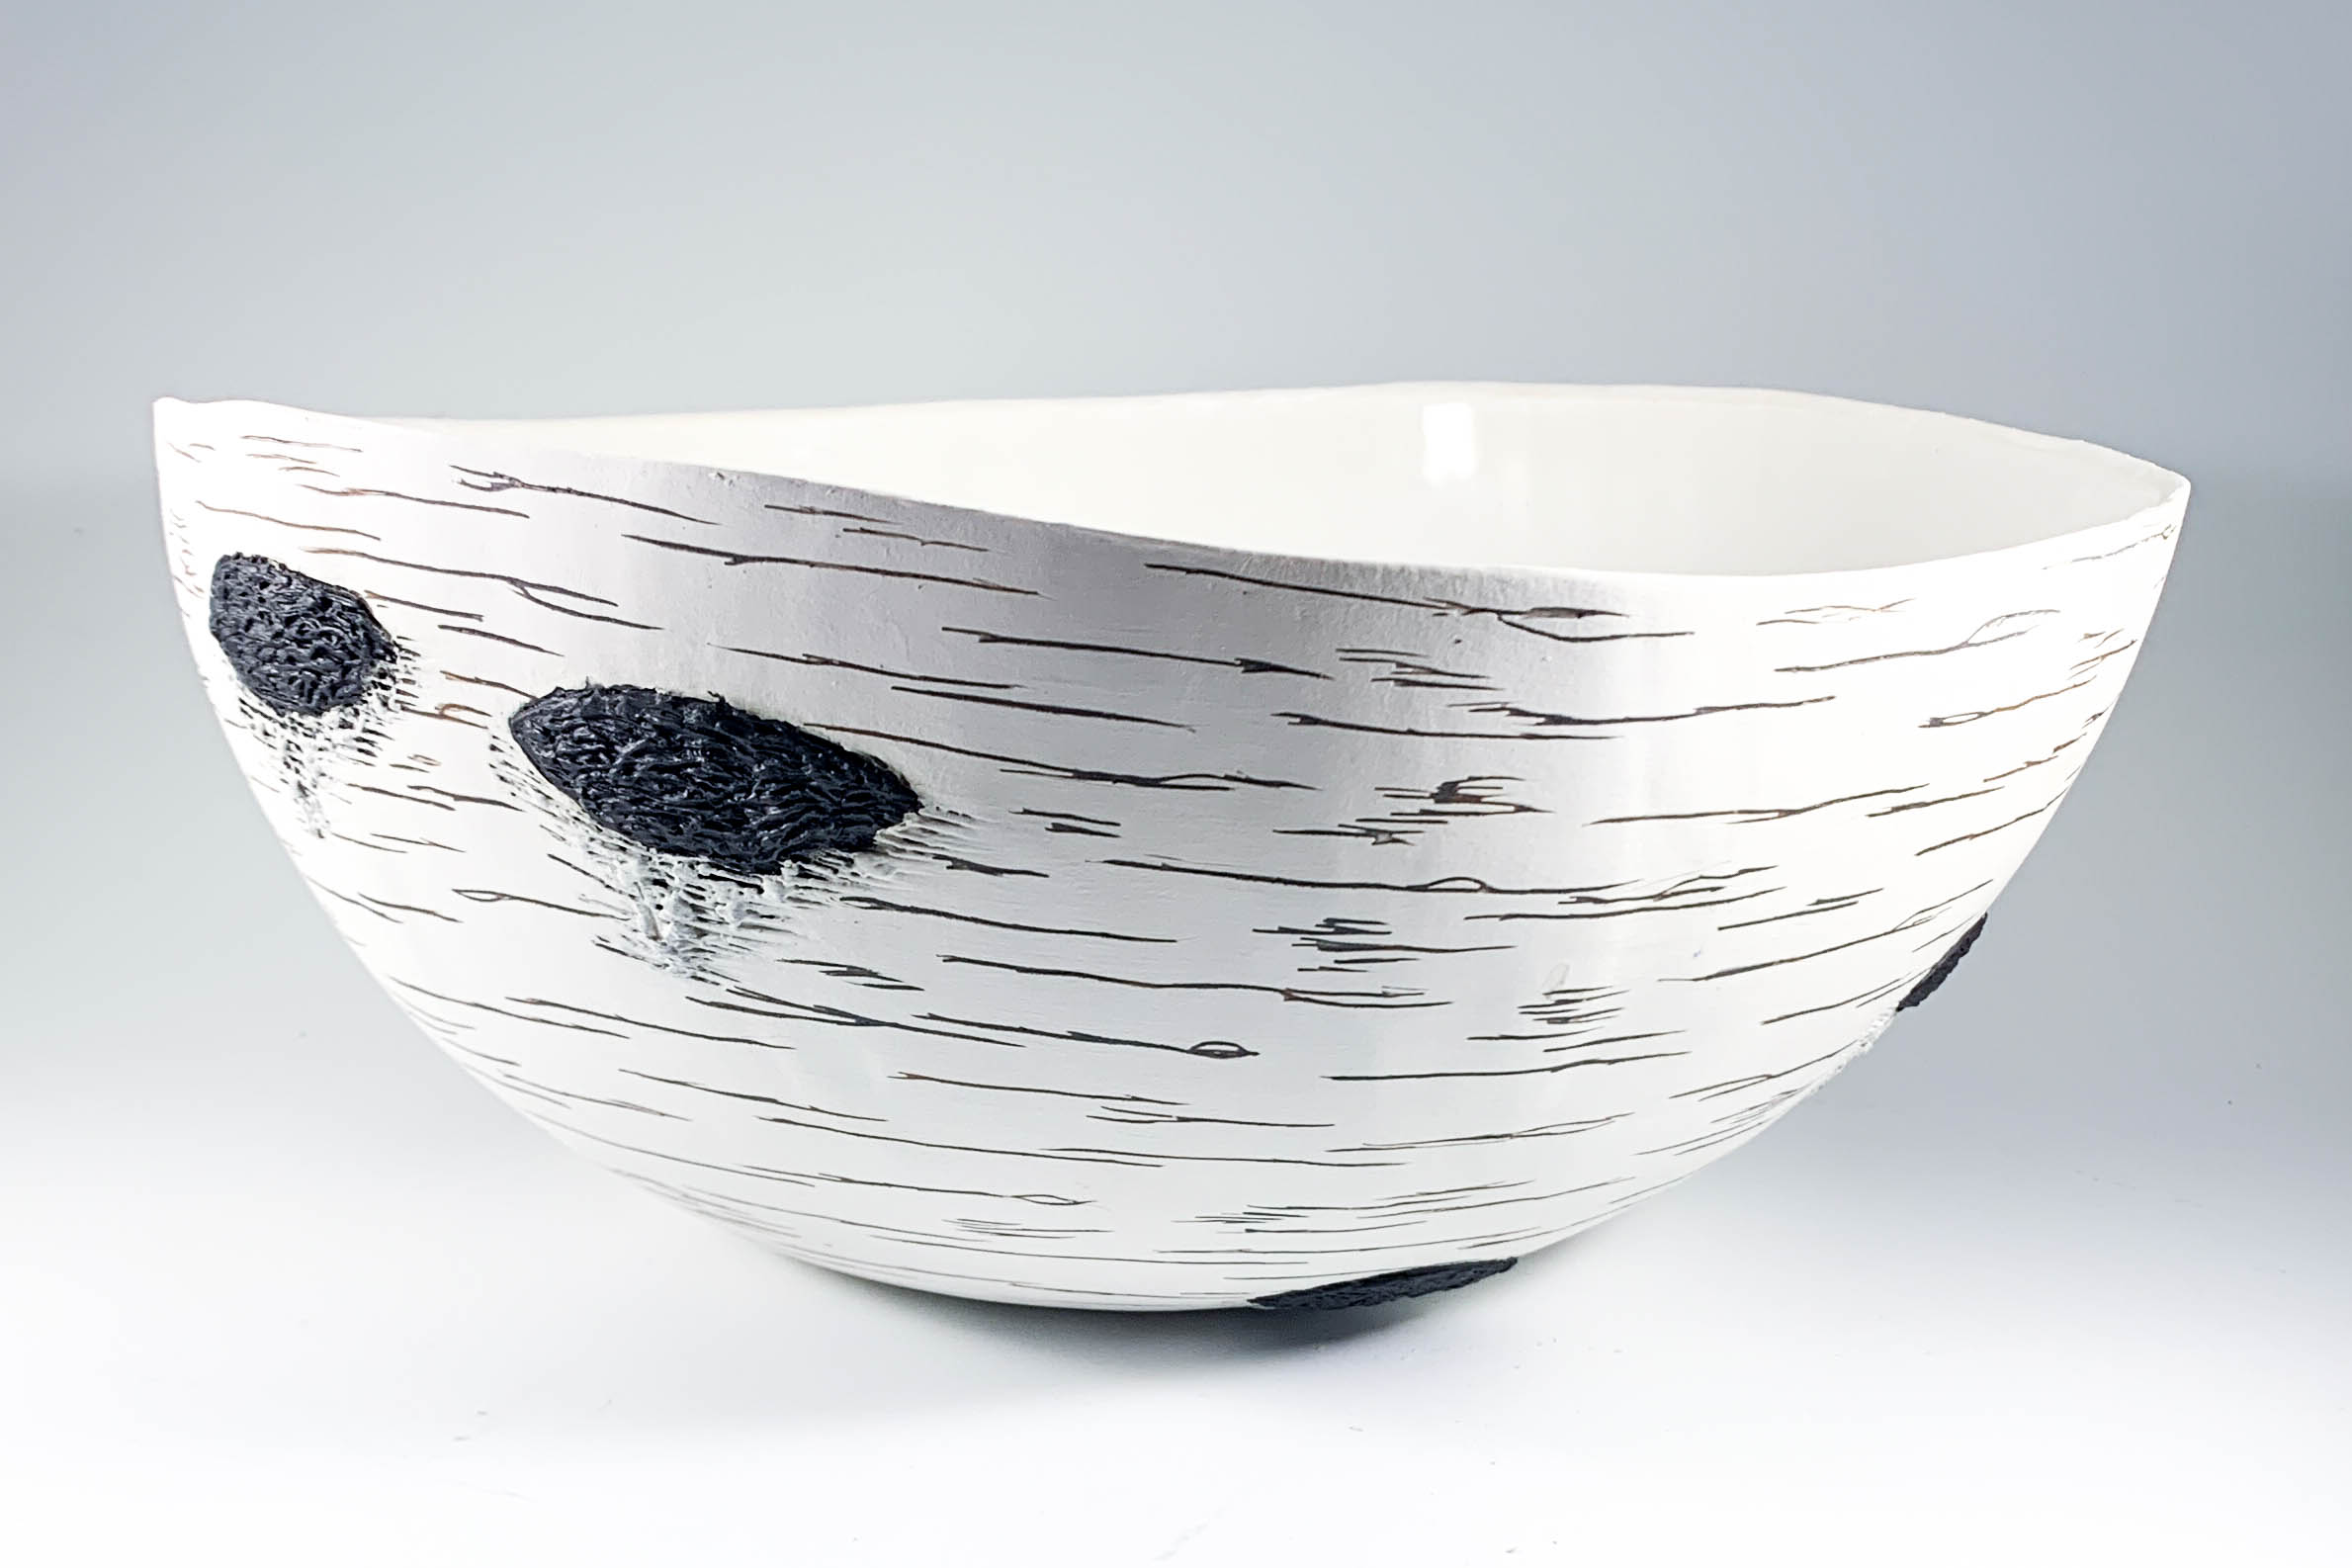 Kimberly Alison's Birch Fruit Bowl featured at the Southern Vermont Arts Center.